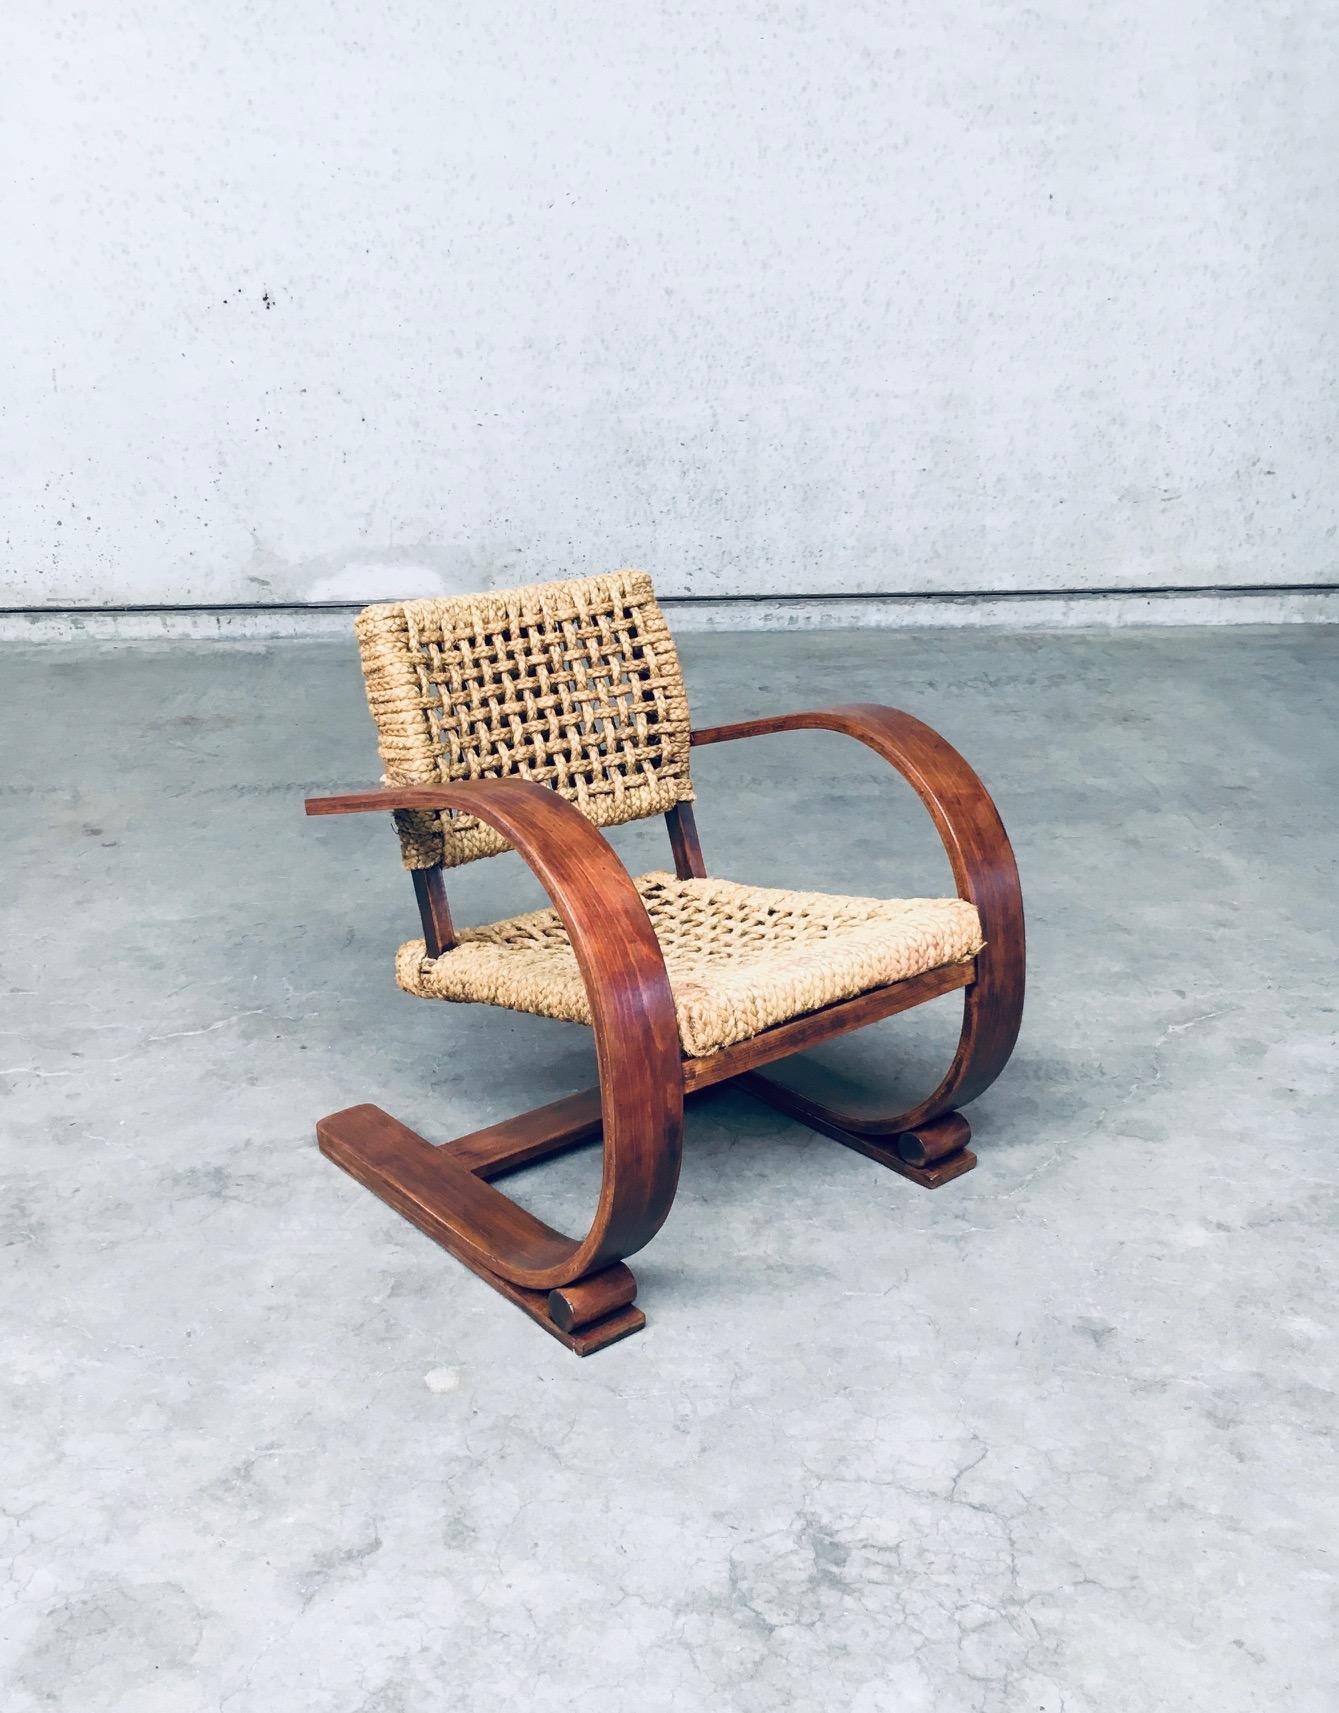 Vintage Mediterranean Design Rope Lounge Chair. Designed by Adrien Audoux & Frida Minet for Vibo Vesoul. Made in France, 1930's / 40's period. Curved bentwood darker stained wooden frame with woven rope seat and back rest. This is a classic design